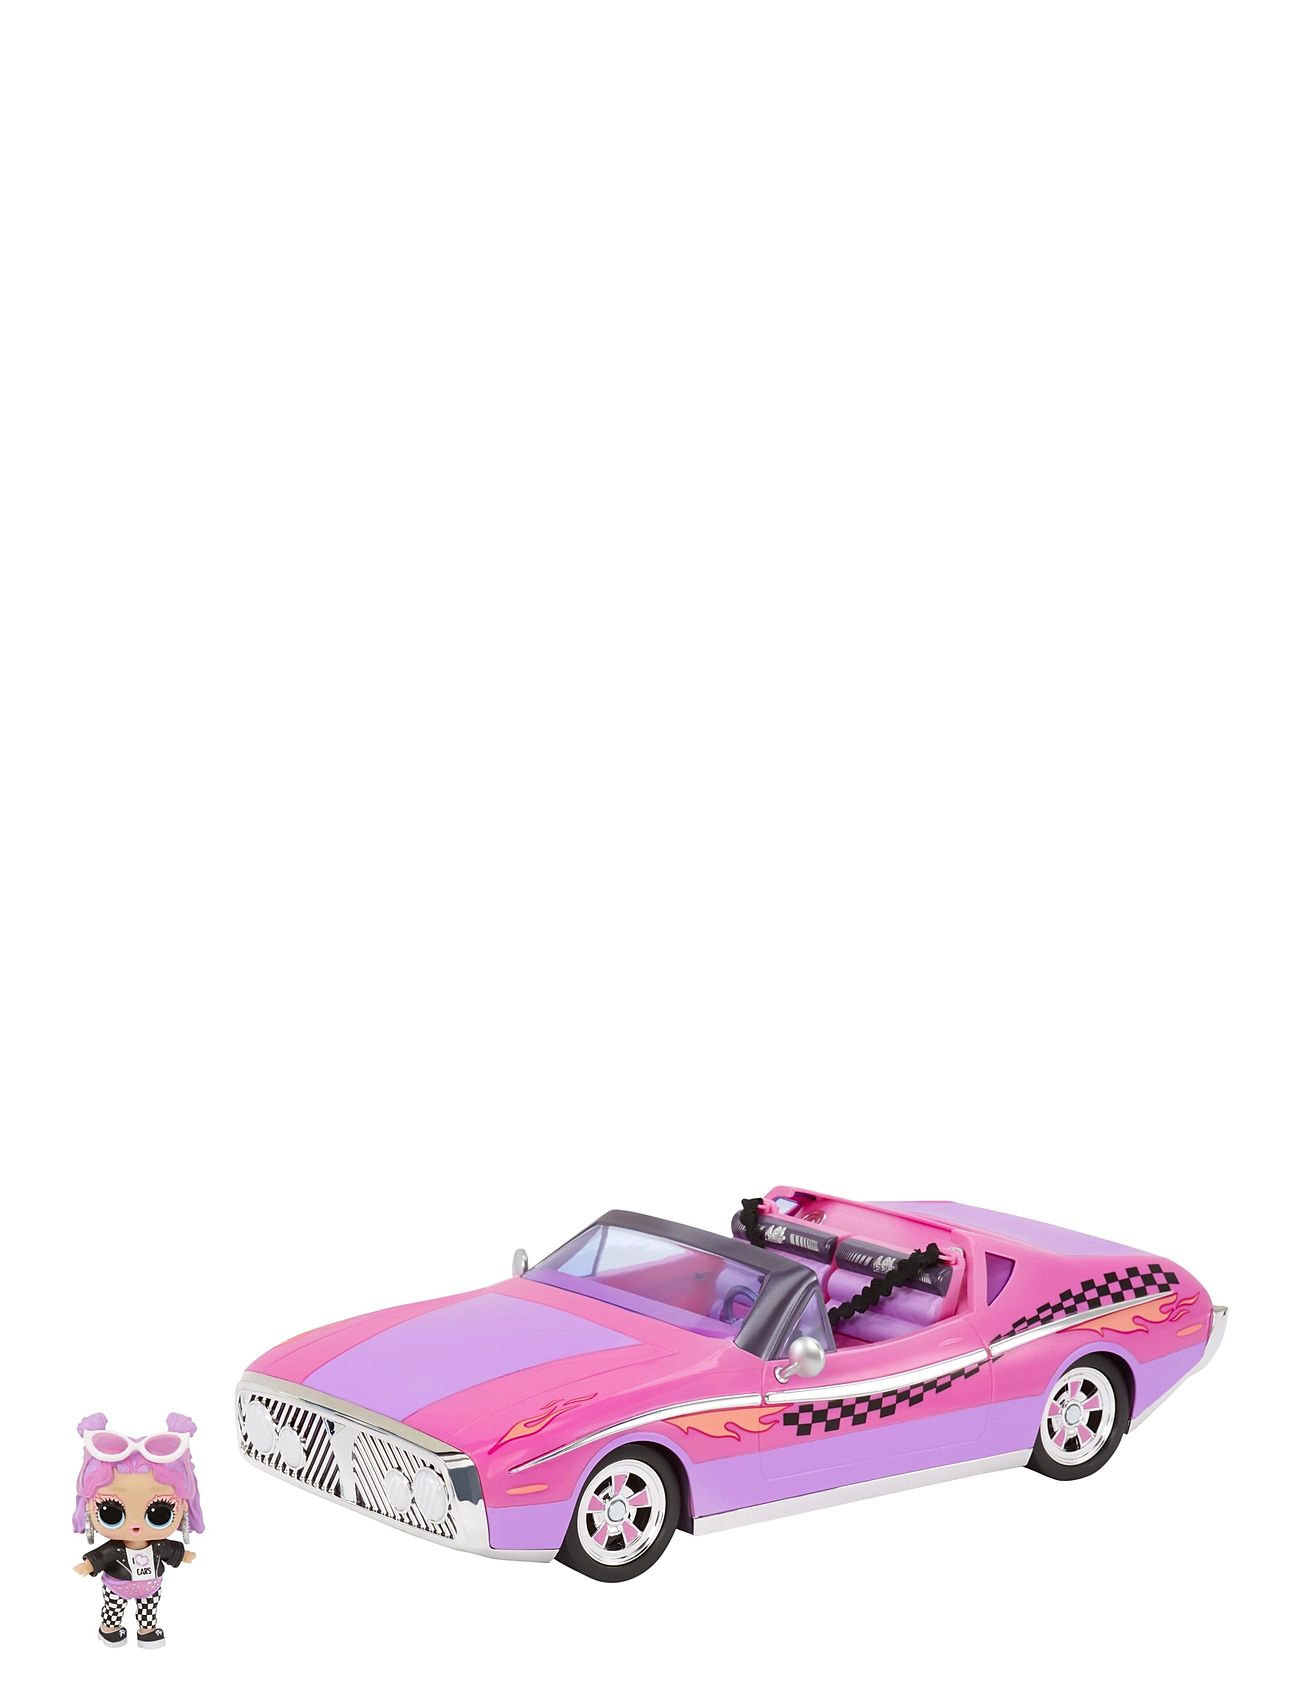 L.O.L "L.o.l. City Cruiser Inkl. 1 Exclusive Omg Doll Toys Toy Cars & Vehicles Multi/patterned L.O.L"